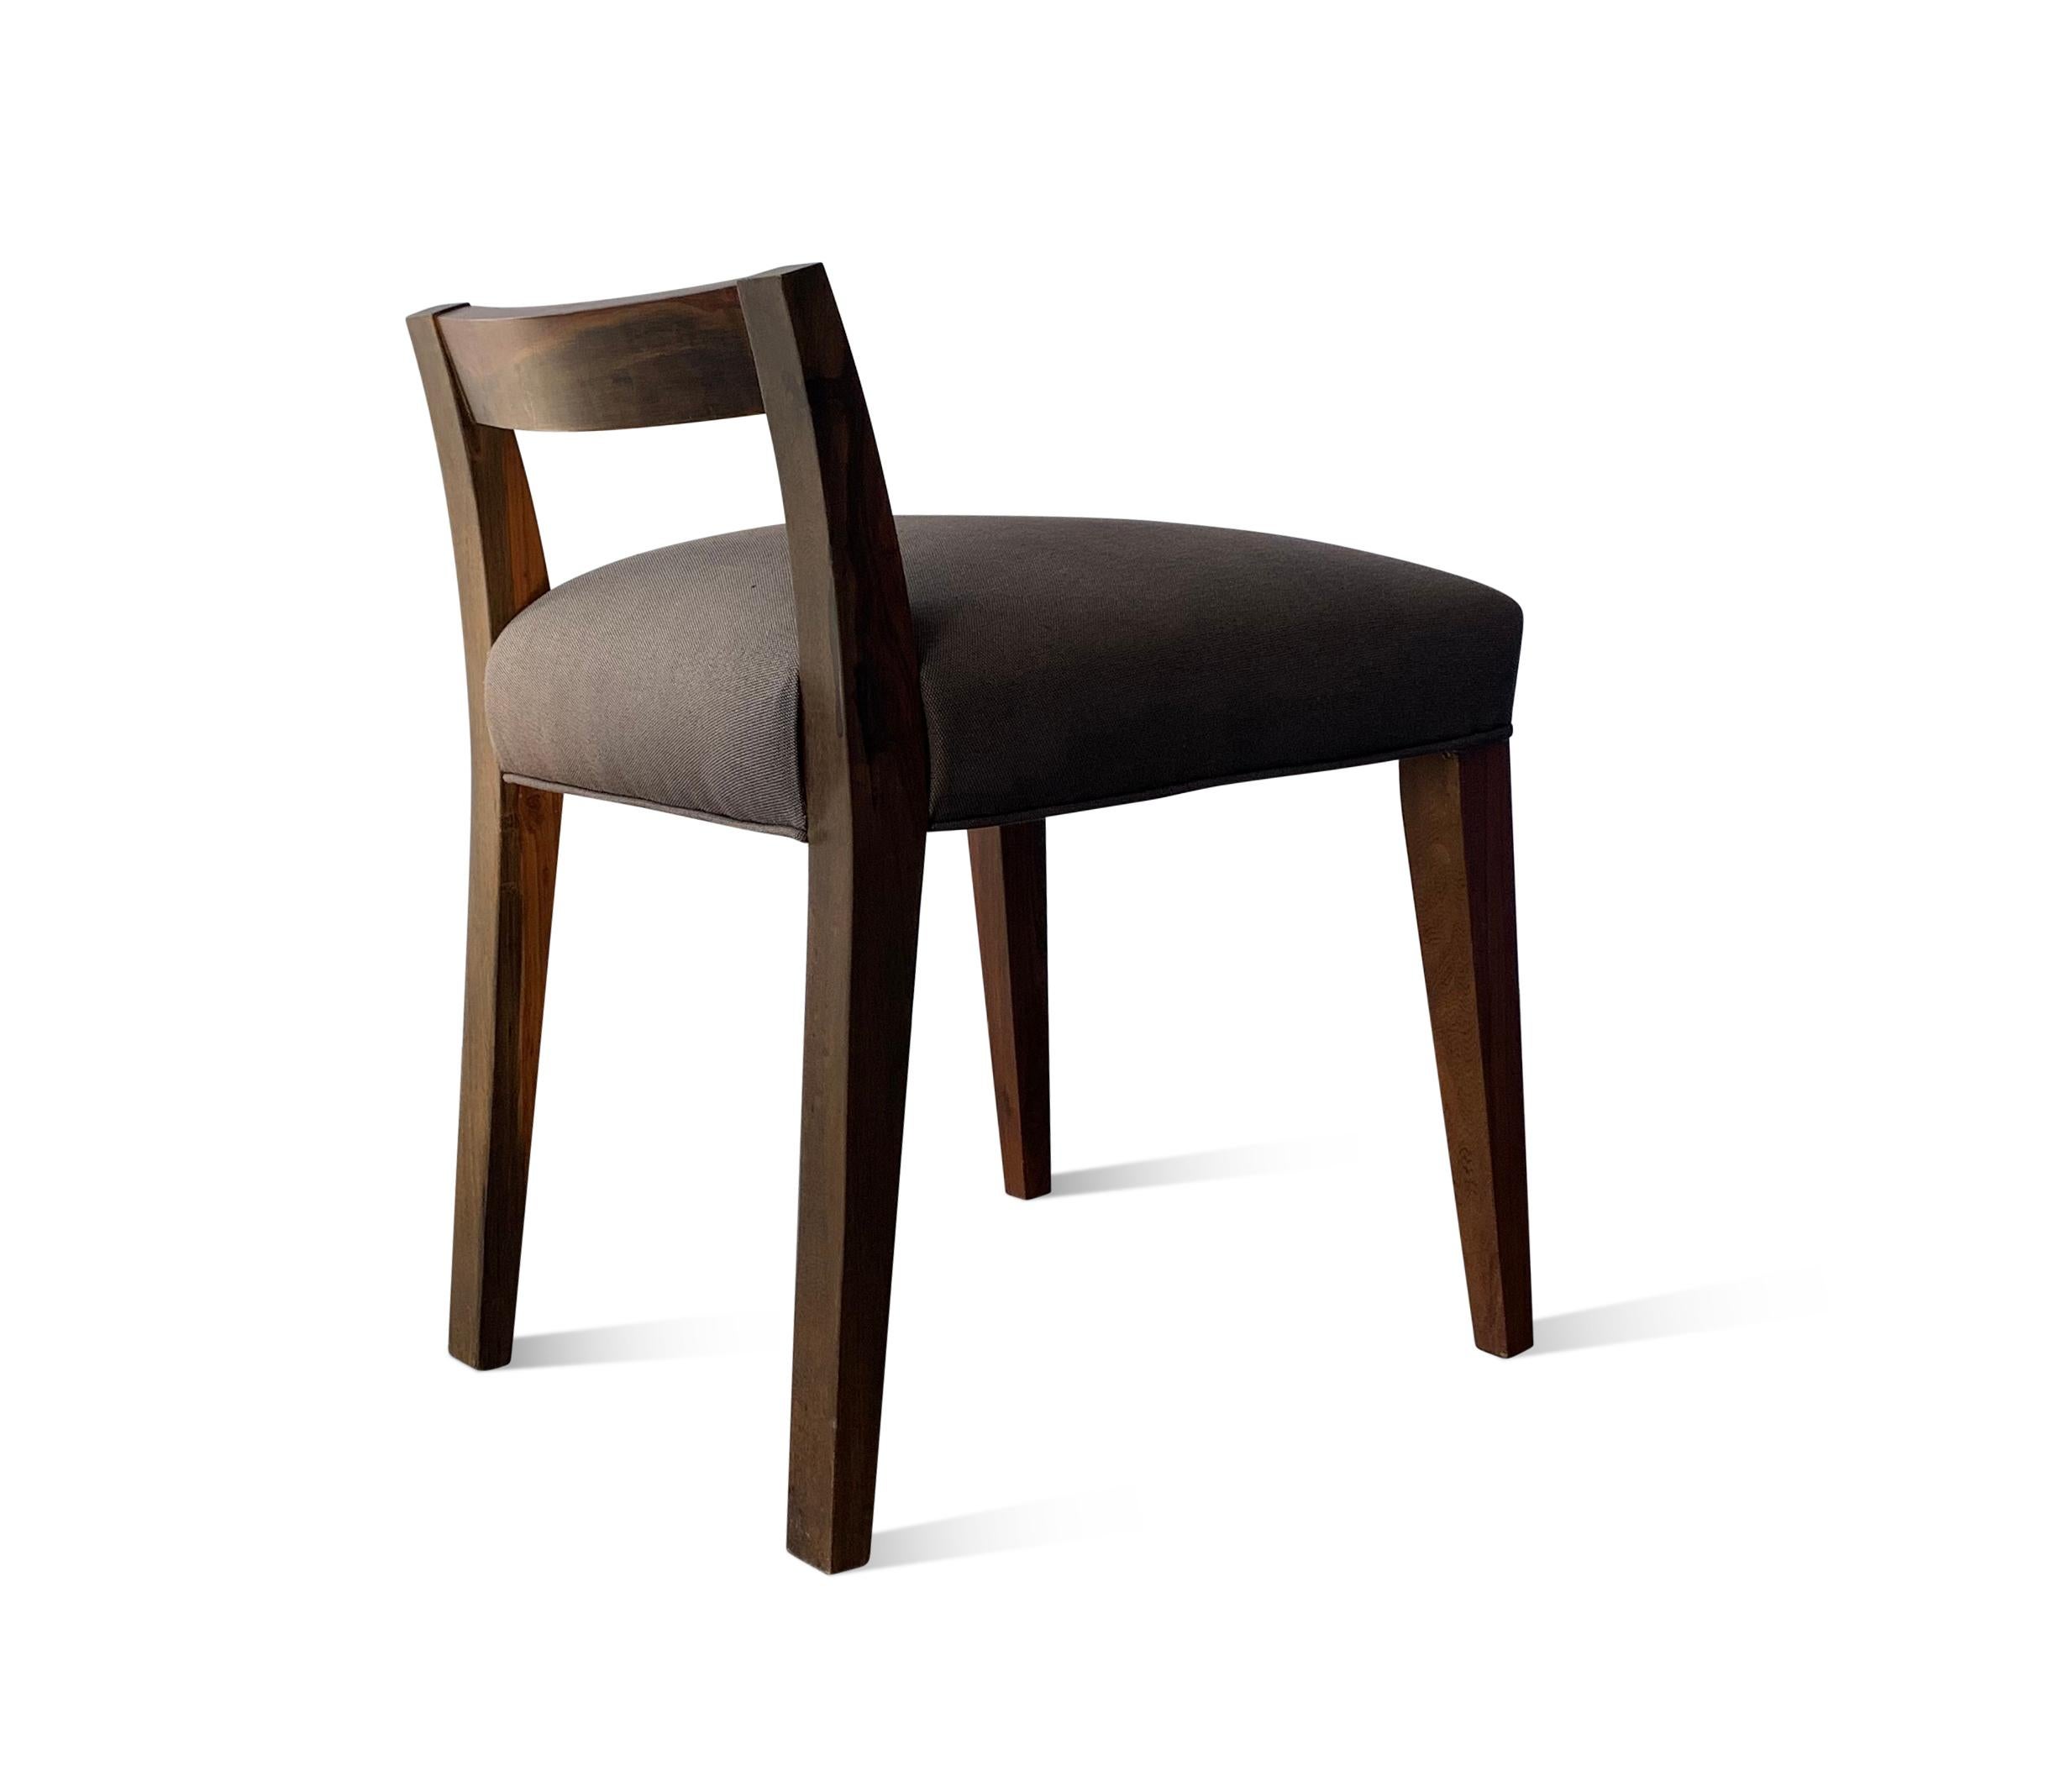 Low Side Chair in sleek Argentine Rosewood from Costantini, Umberto In New Condition For Sale In New York, NY